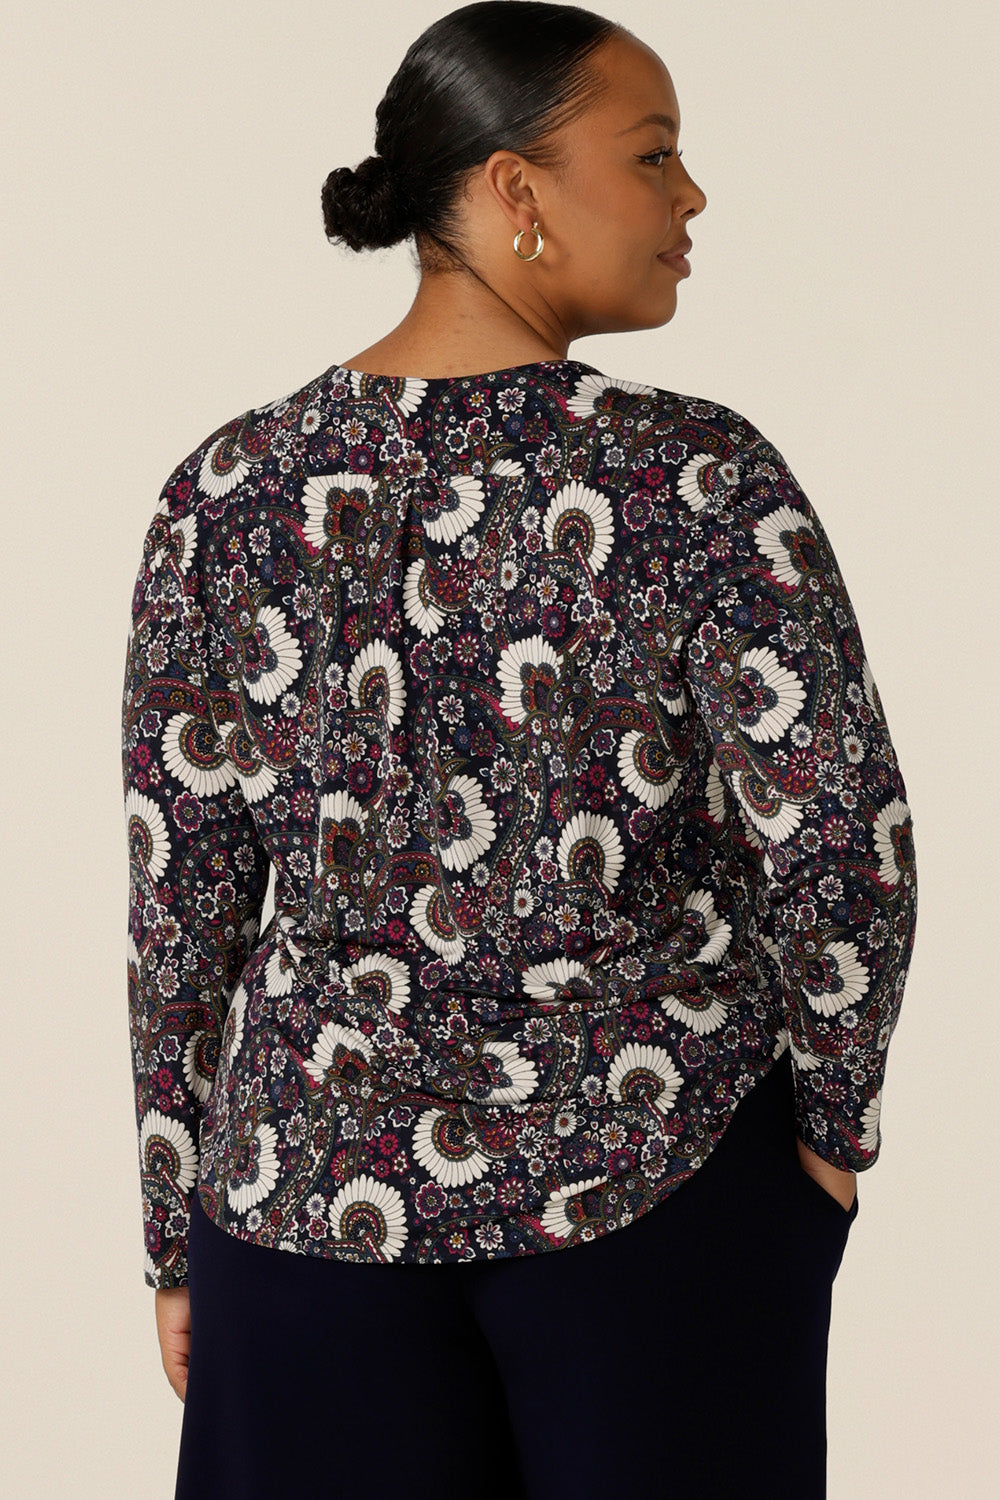 Back view of a long-sleeve, V-neck top in paisley print jersey, for size 18 women. Made in Australia by Australian and New Zealand women's clothing label, L&F this is a great top for work and is available to shop in sizes 8 to 24.